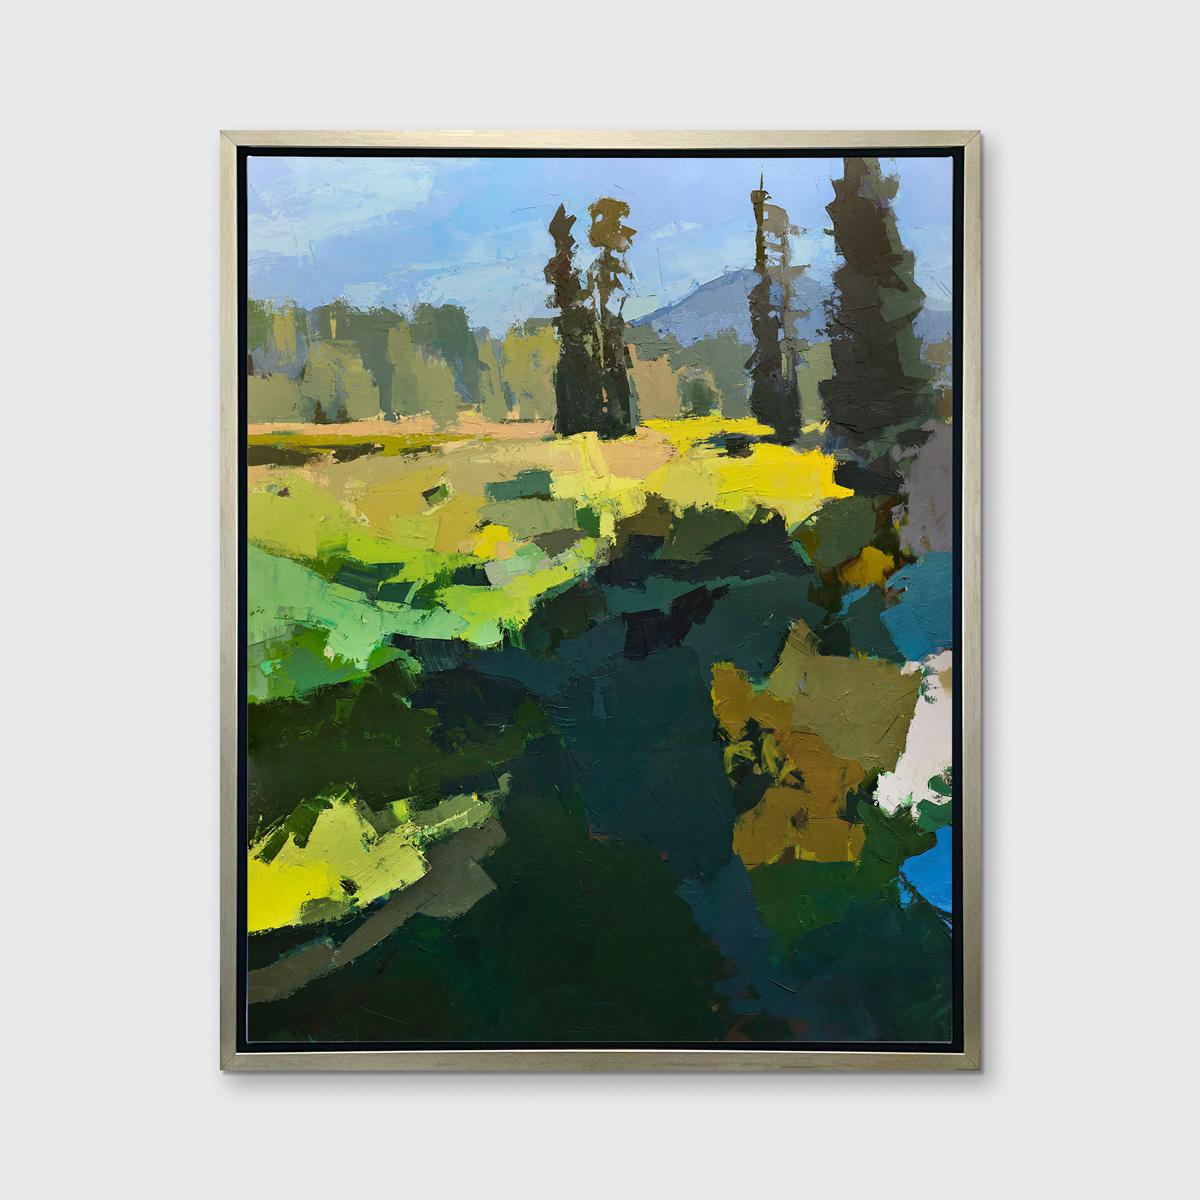 Bri Custer Landscape Print - "A Propensity for Growth" Framed Limited Edition Print, 60" x 48"